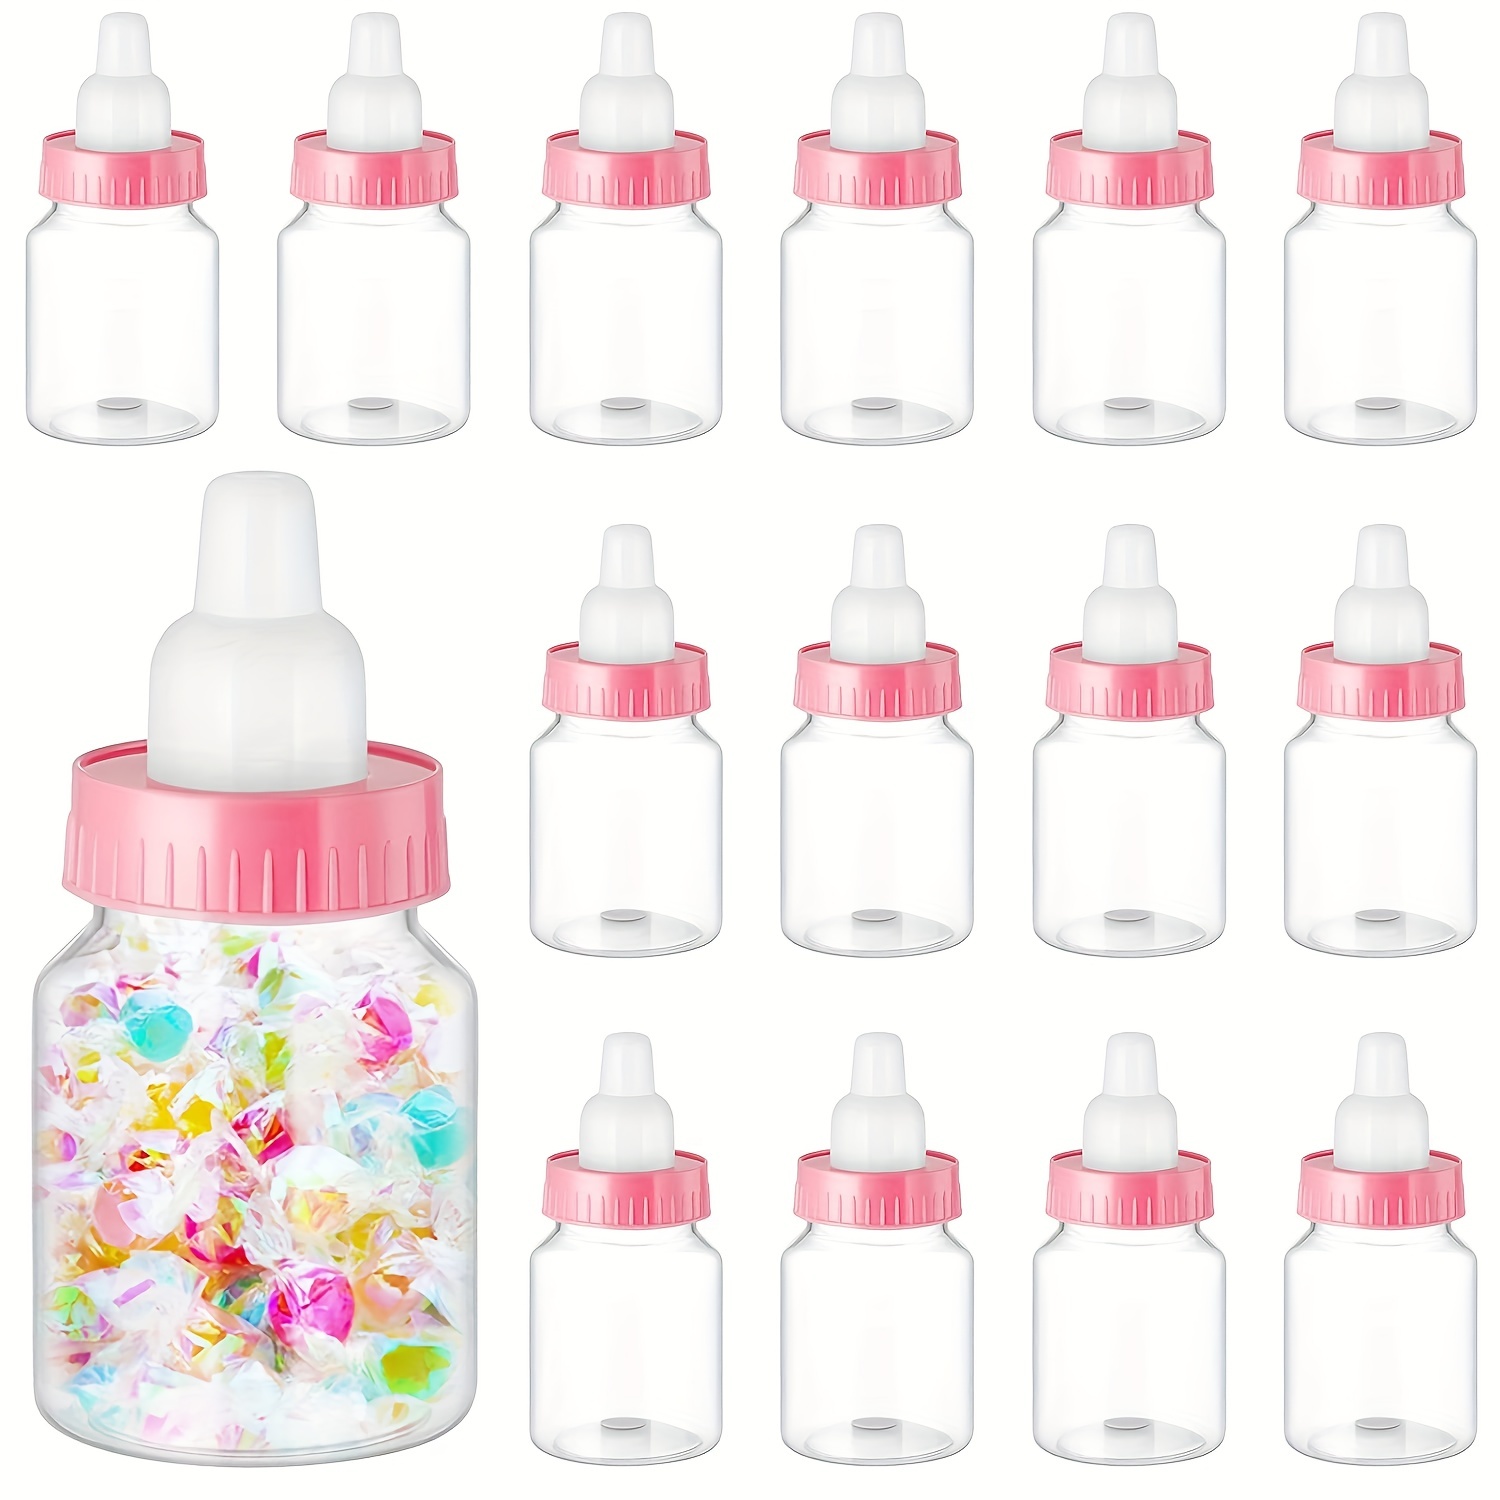 VEYLIN 72Pcs 1 Inch Mini Plastic Babies Mixed Race, Small Cute Babies  Figurines for Ice Cube Baby Shower My Water Broke Game